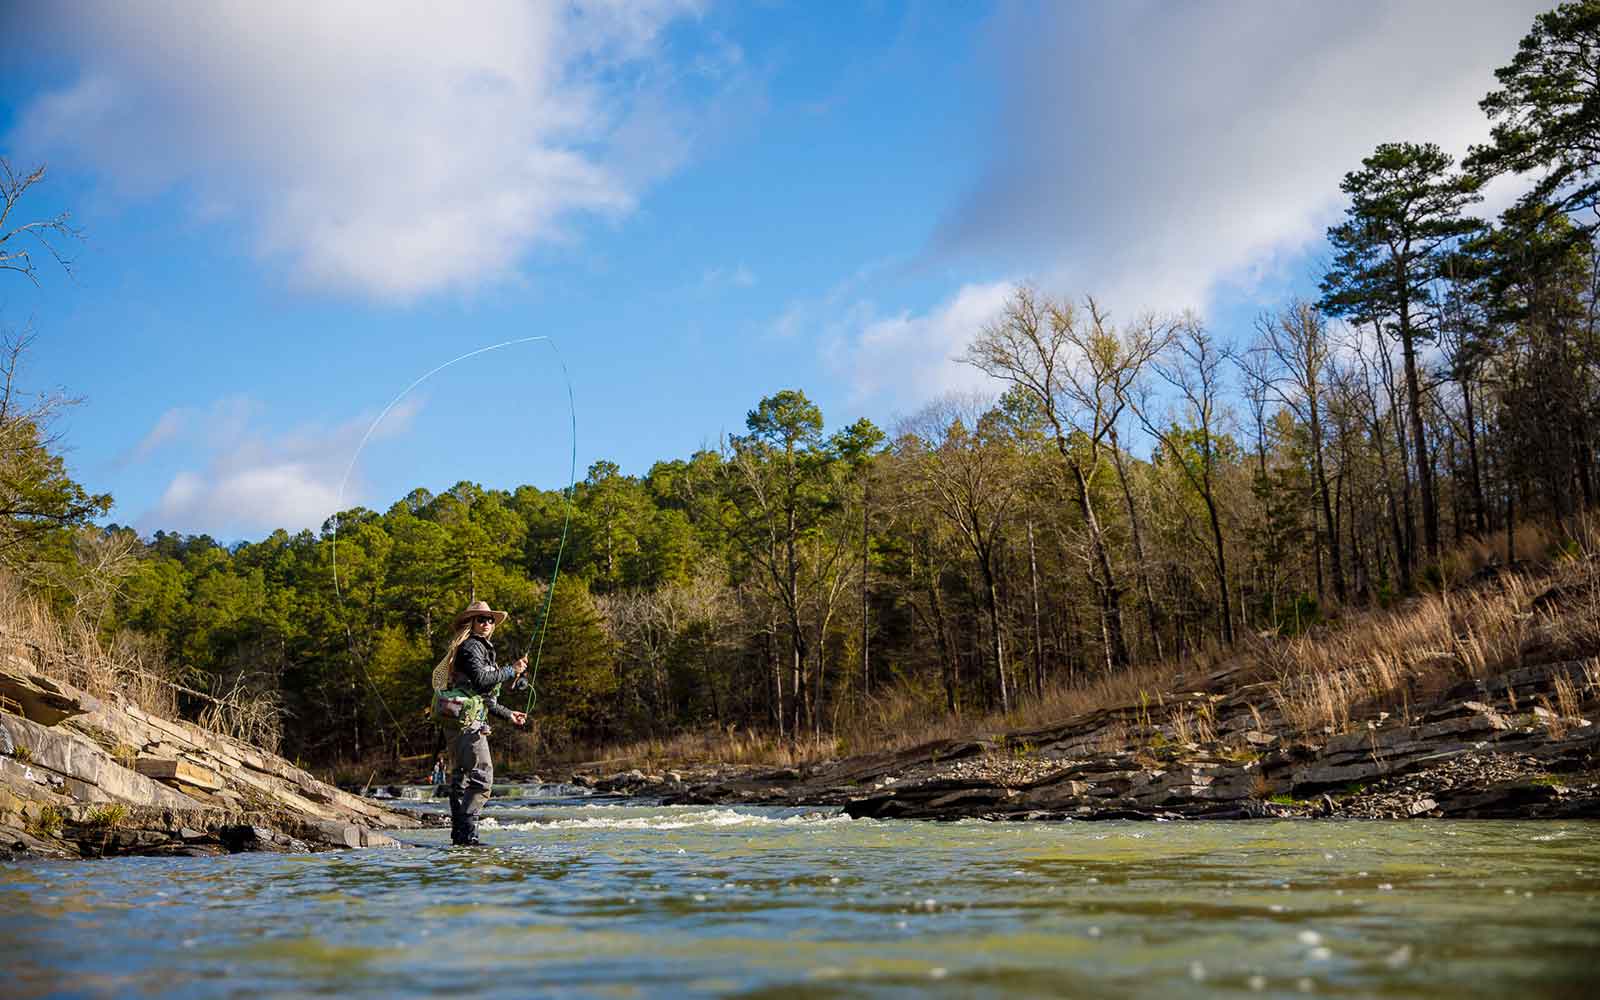 Morgan "Mo" Prater fly fishing for rainbow and brown trout on the Lower Mountain Fork River in Beavers Bend. Winter fishing.